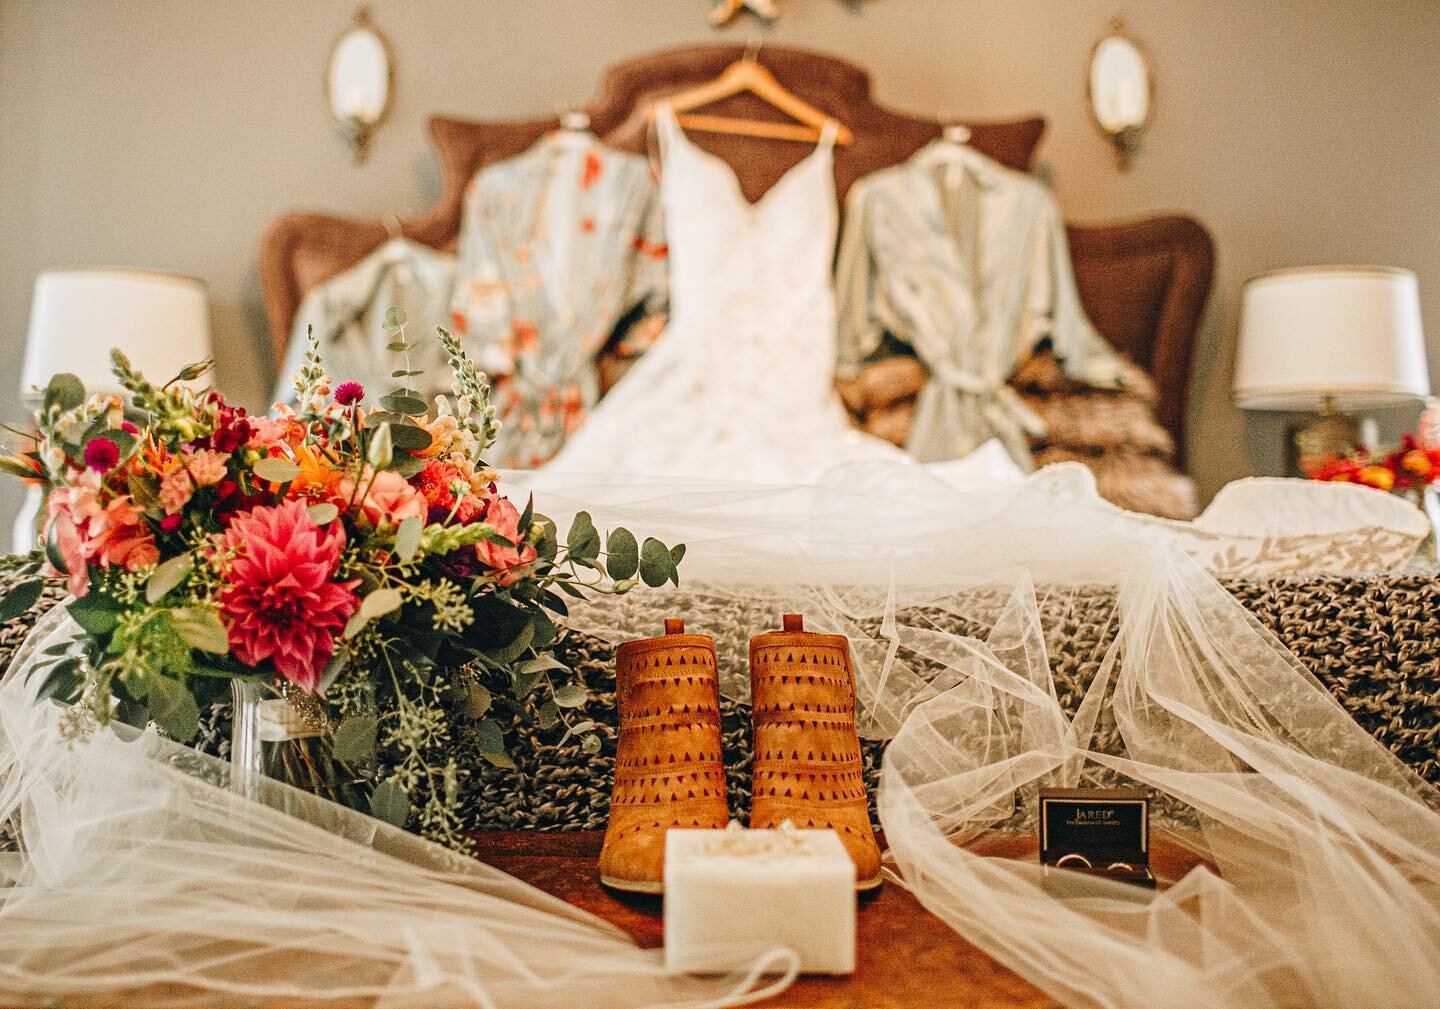 Detail shots in our Mane House Bridal Suite by @sheilamrazphotography. 😍